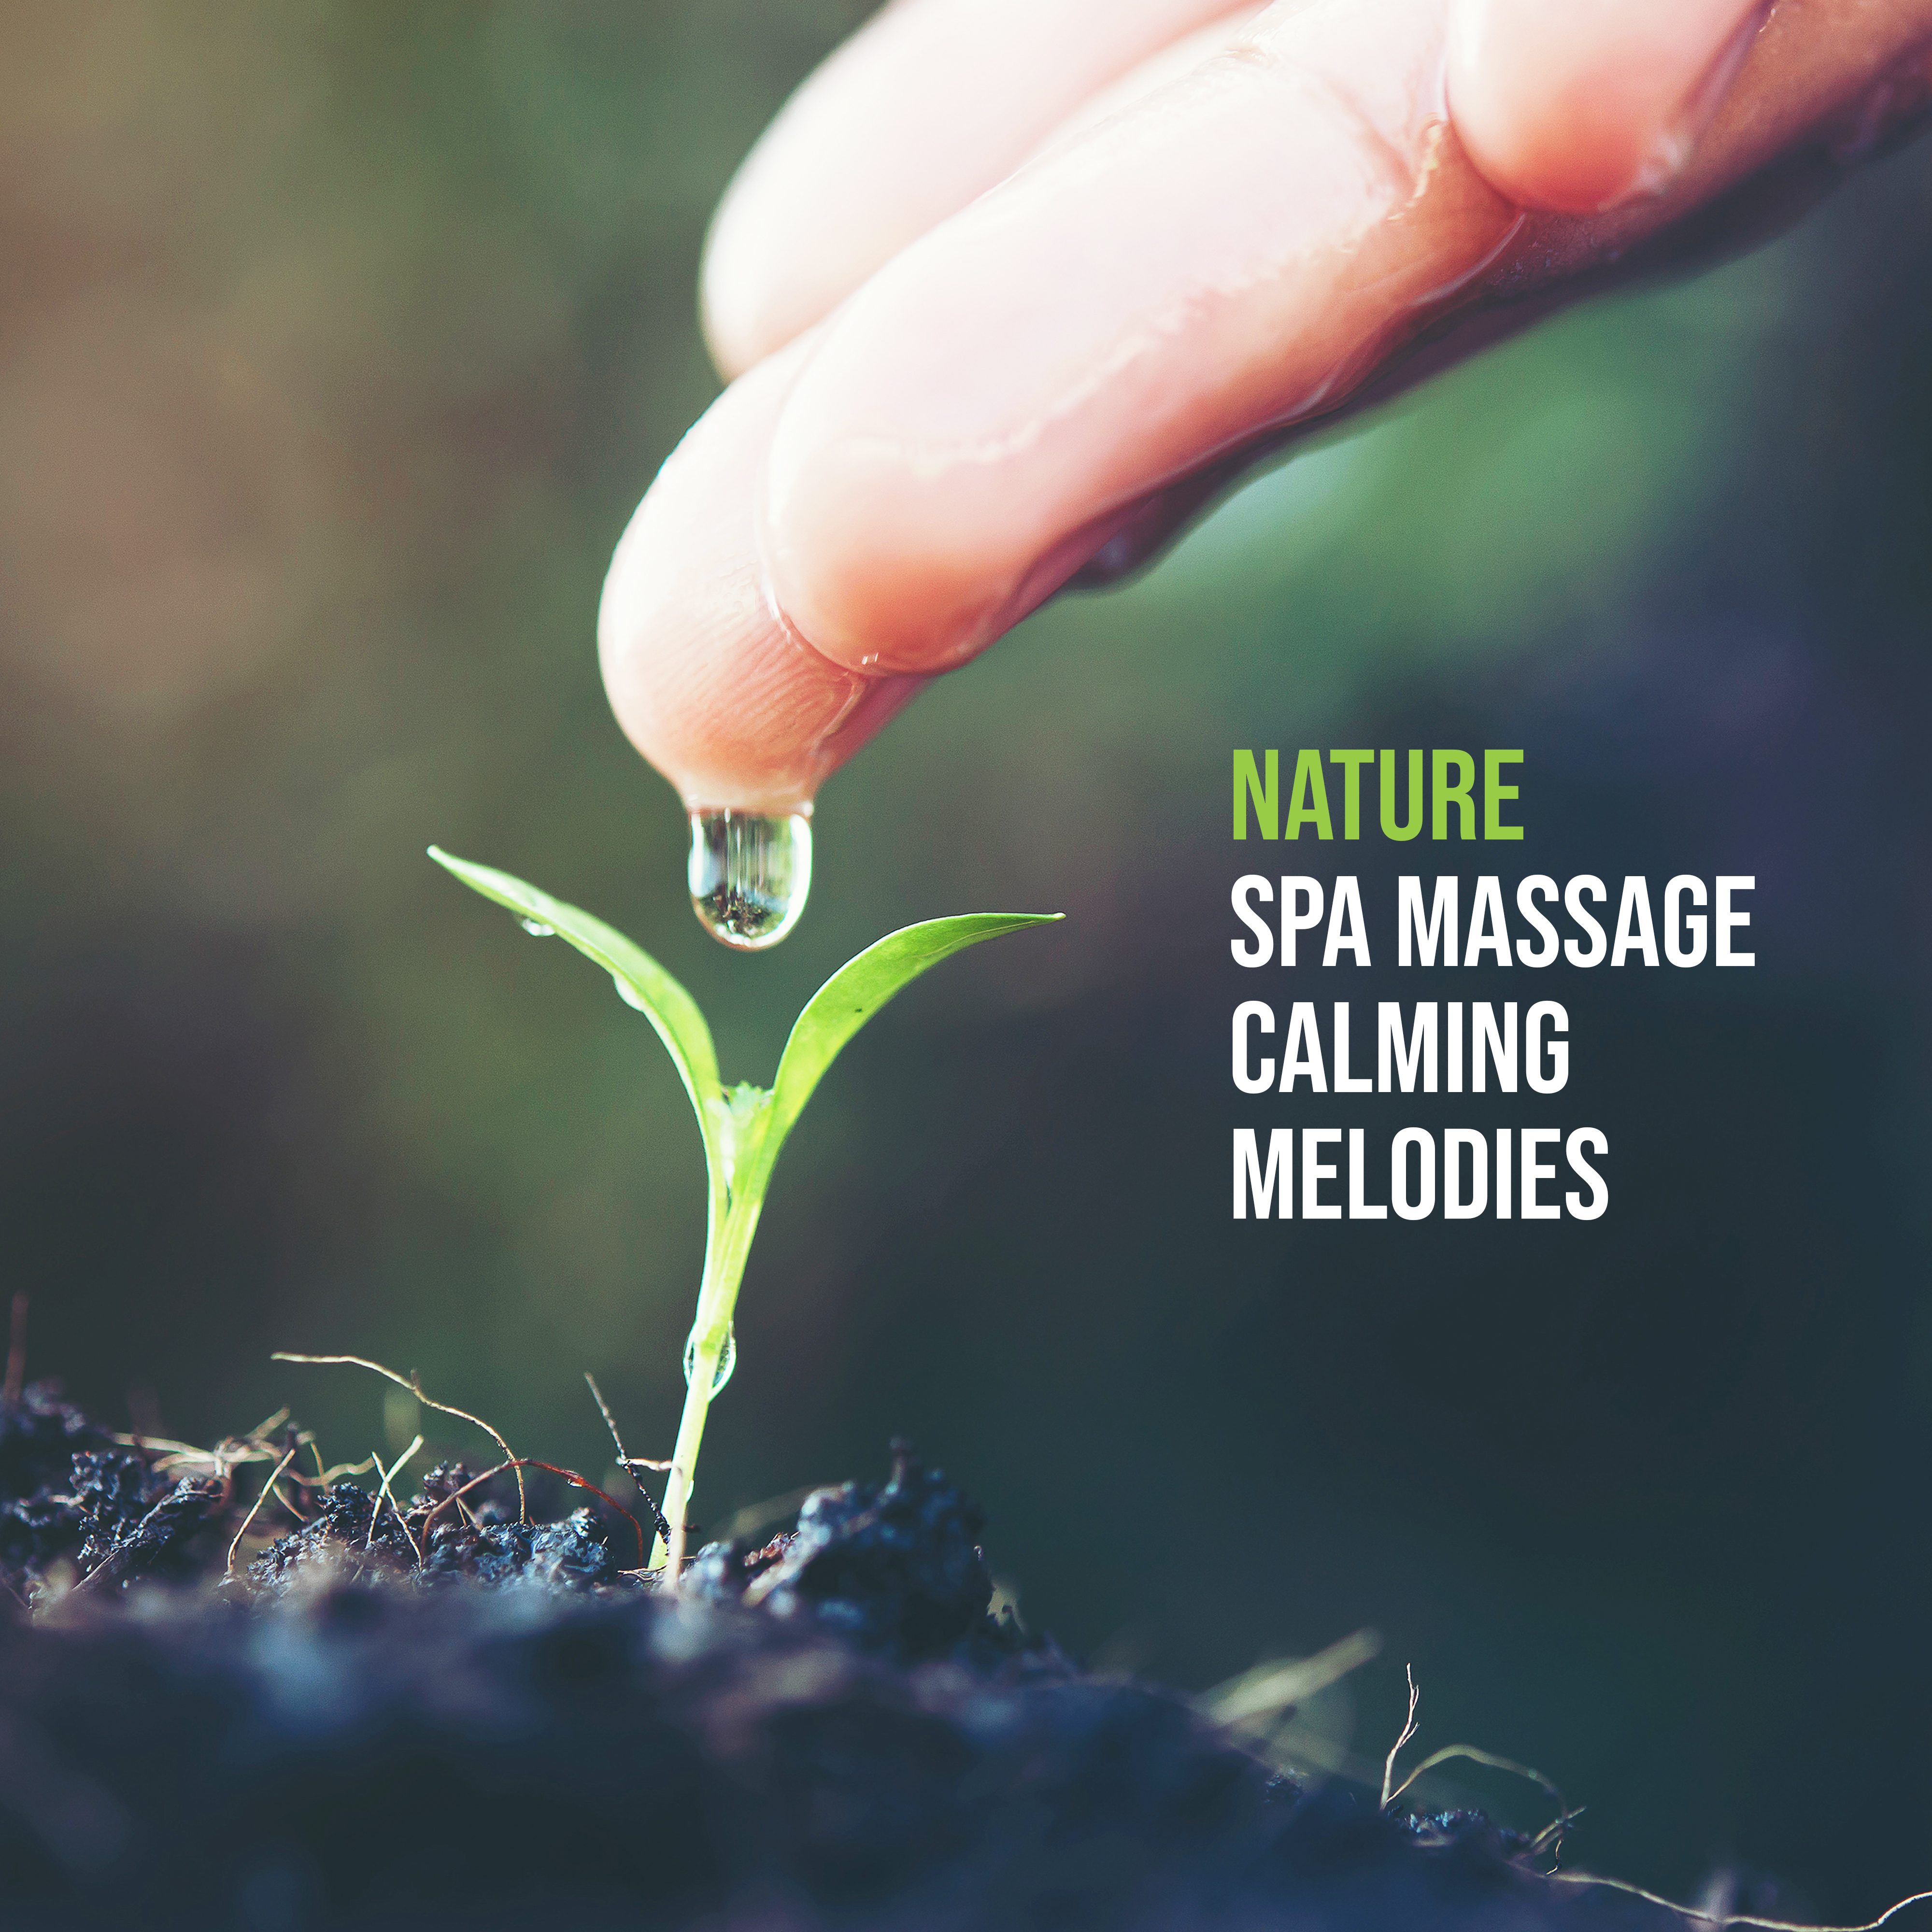 Nature Spa Massage Calming Melodies  New Age Spa  Wellness Sounds of Nature, Bird' s Songs, Slow Relaxing Music